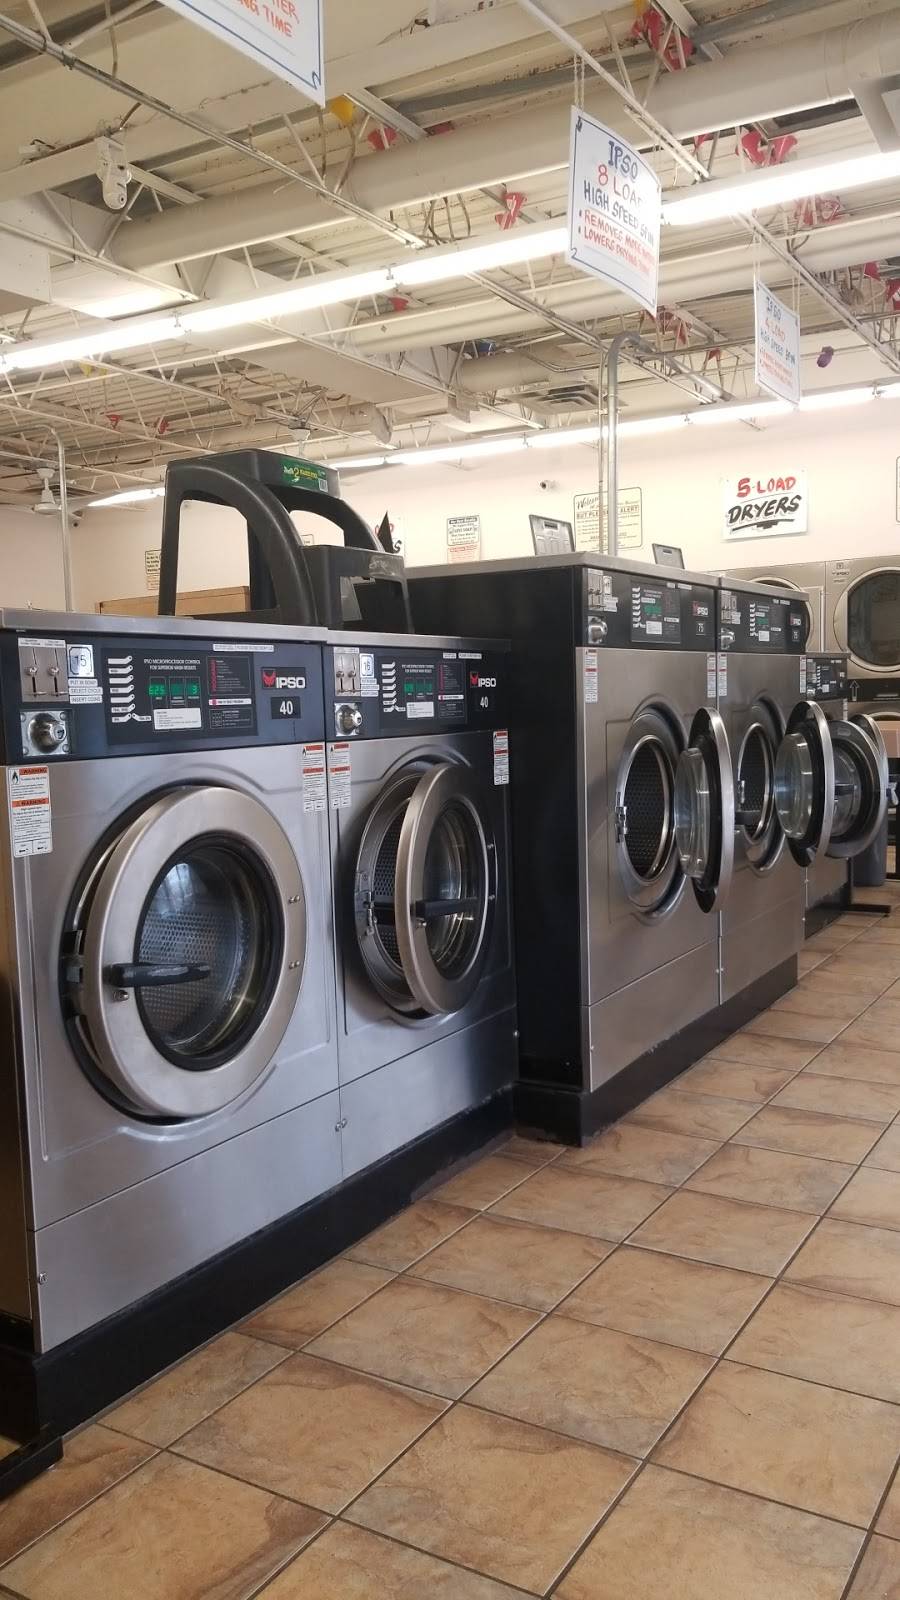 Josies Coin Laundry | 1231 Larpenteur Ave W, Roseville, MN 55113 | Phone: (612) 281-1866